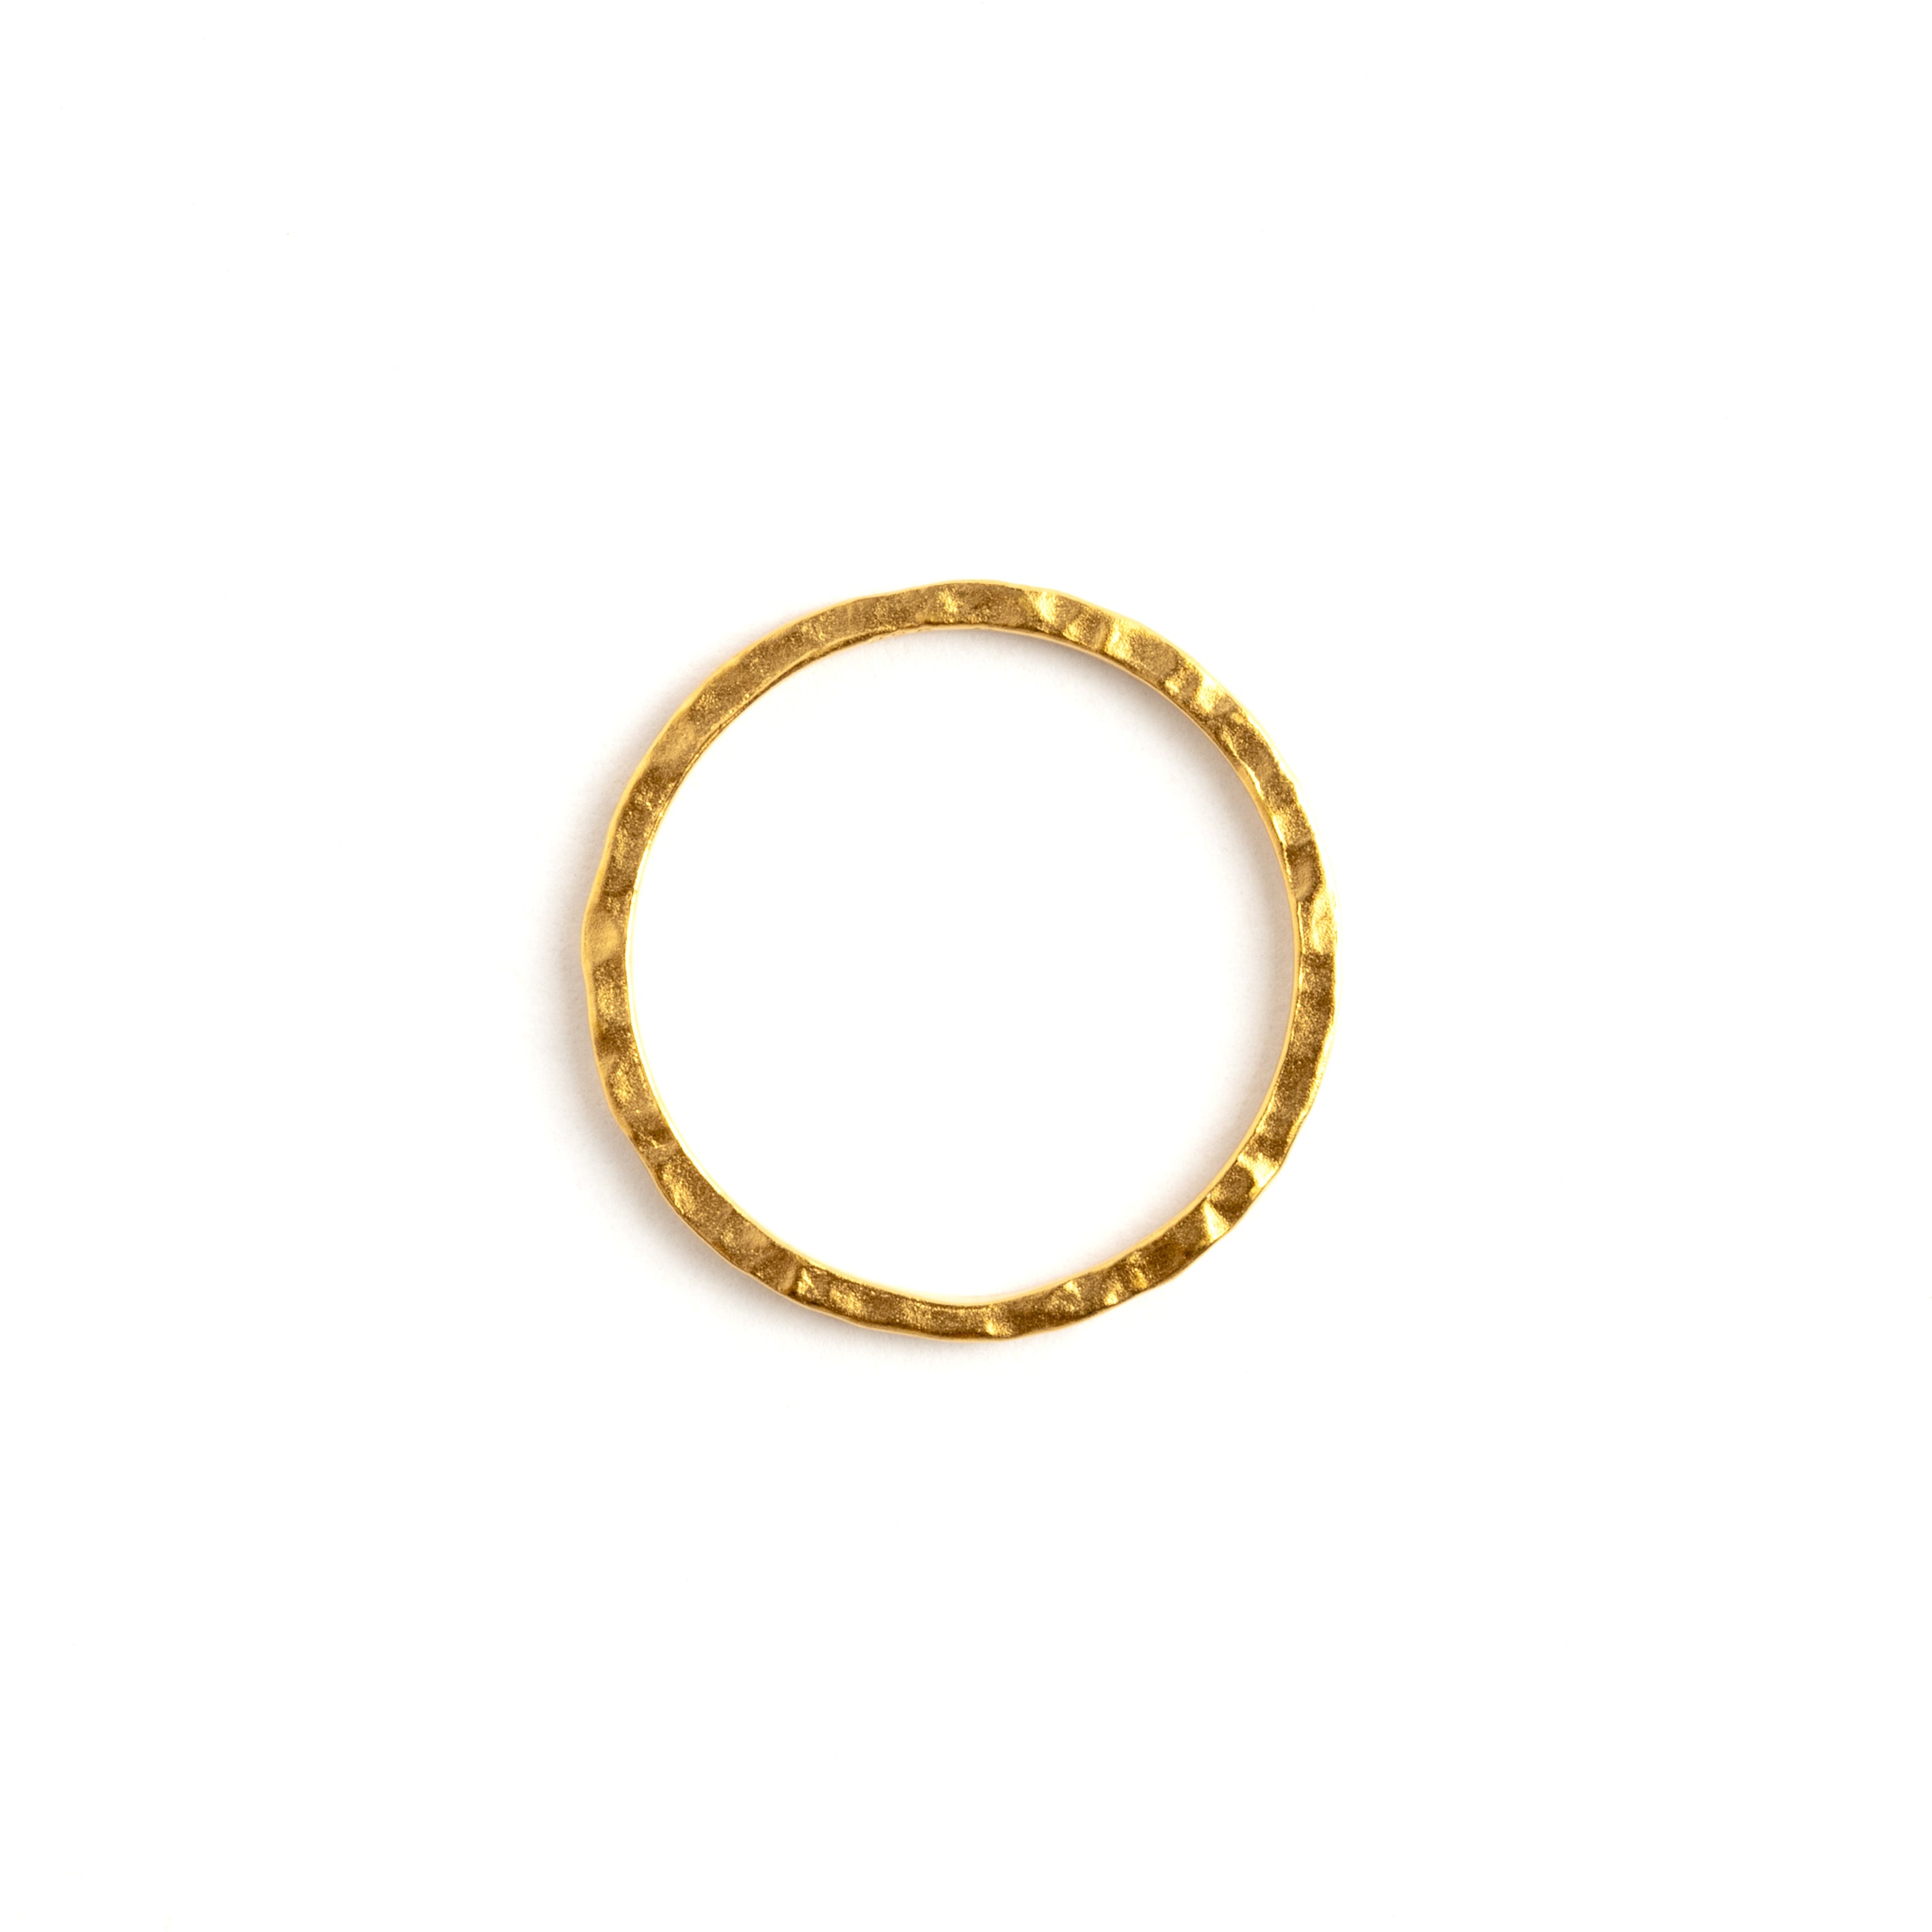 24k gold hammered stacking band ring side view